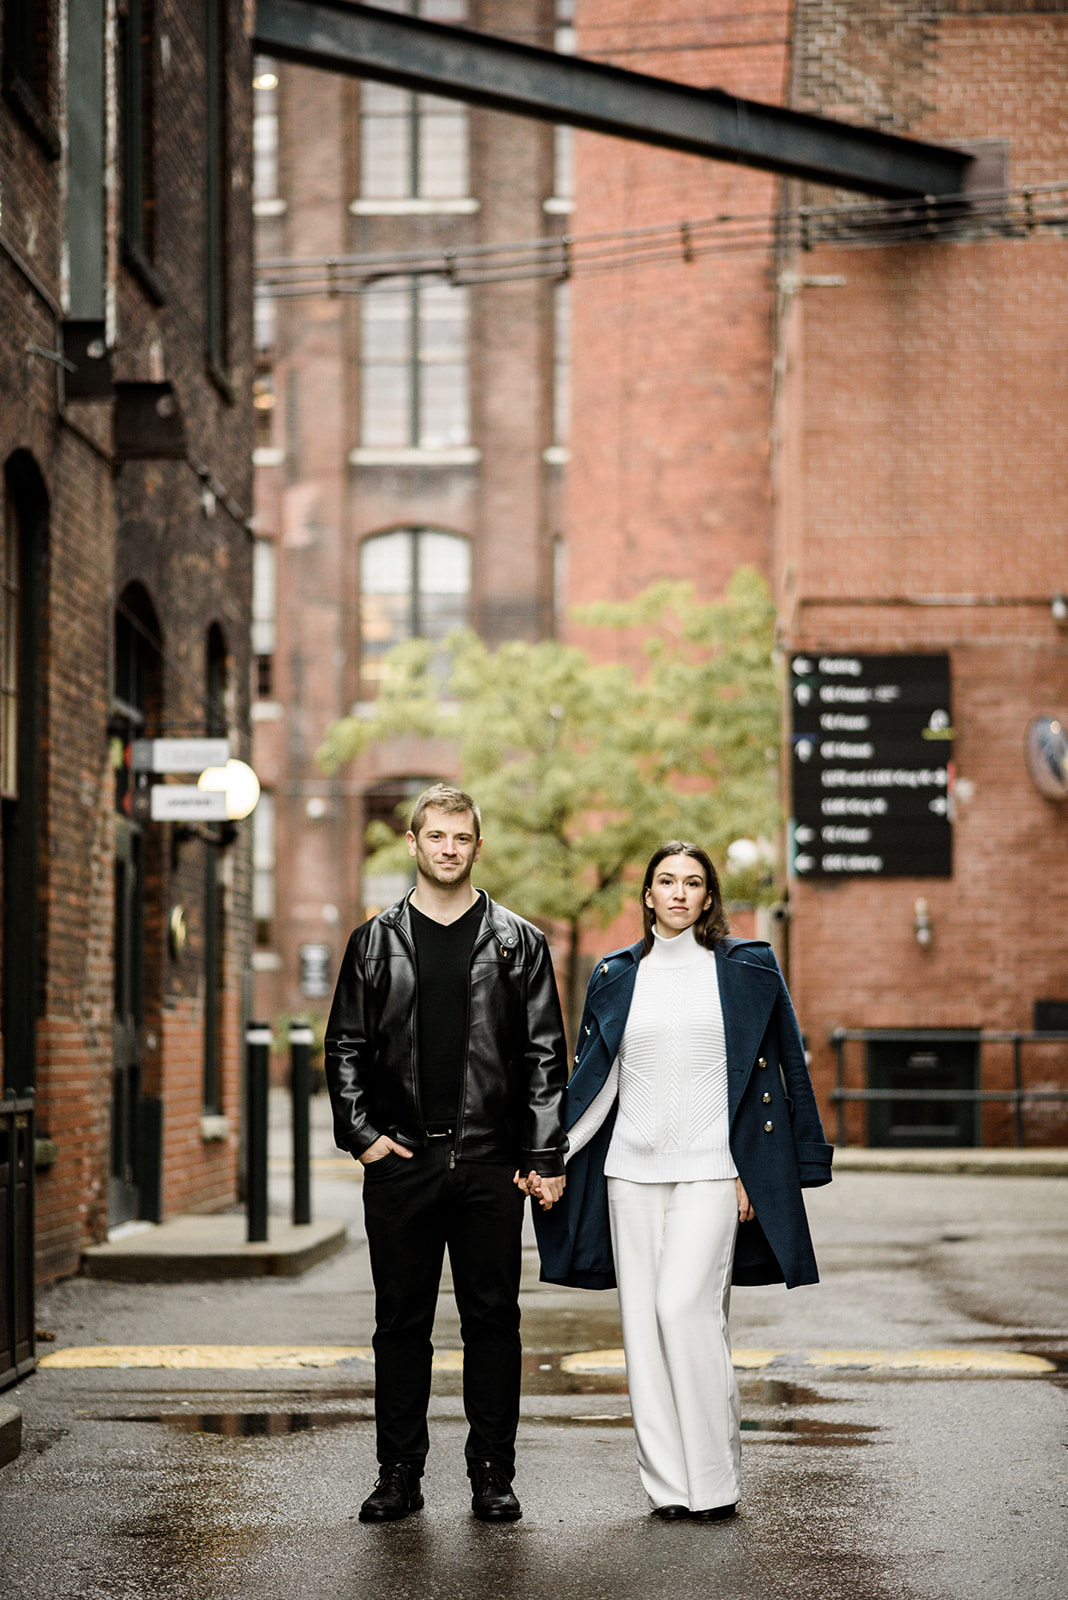 High end engagement session in the old brick neighbourhood of Liberty Villge